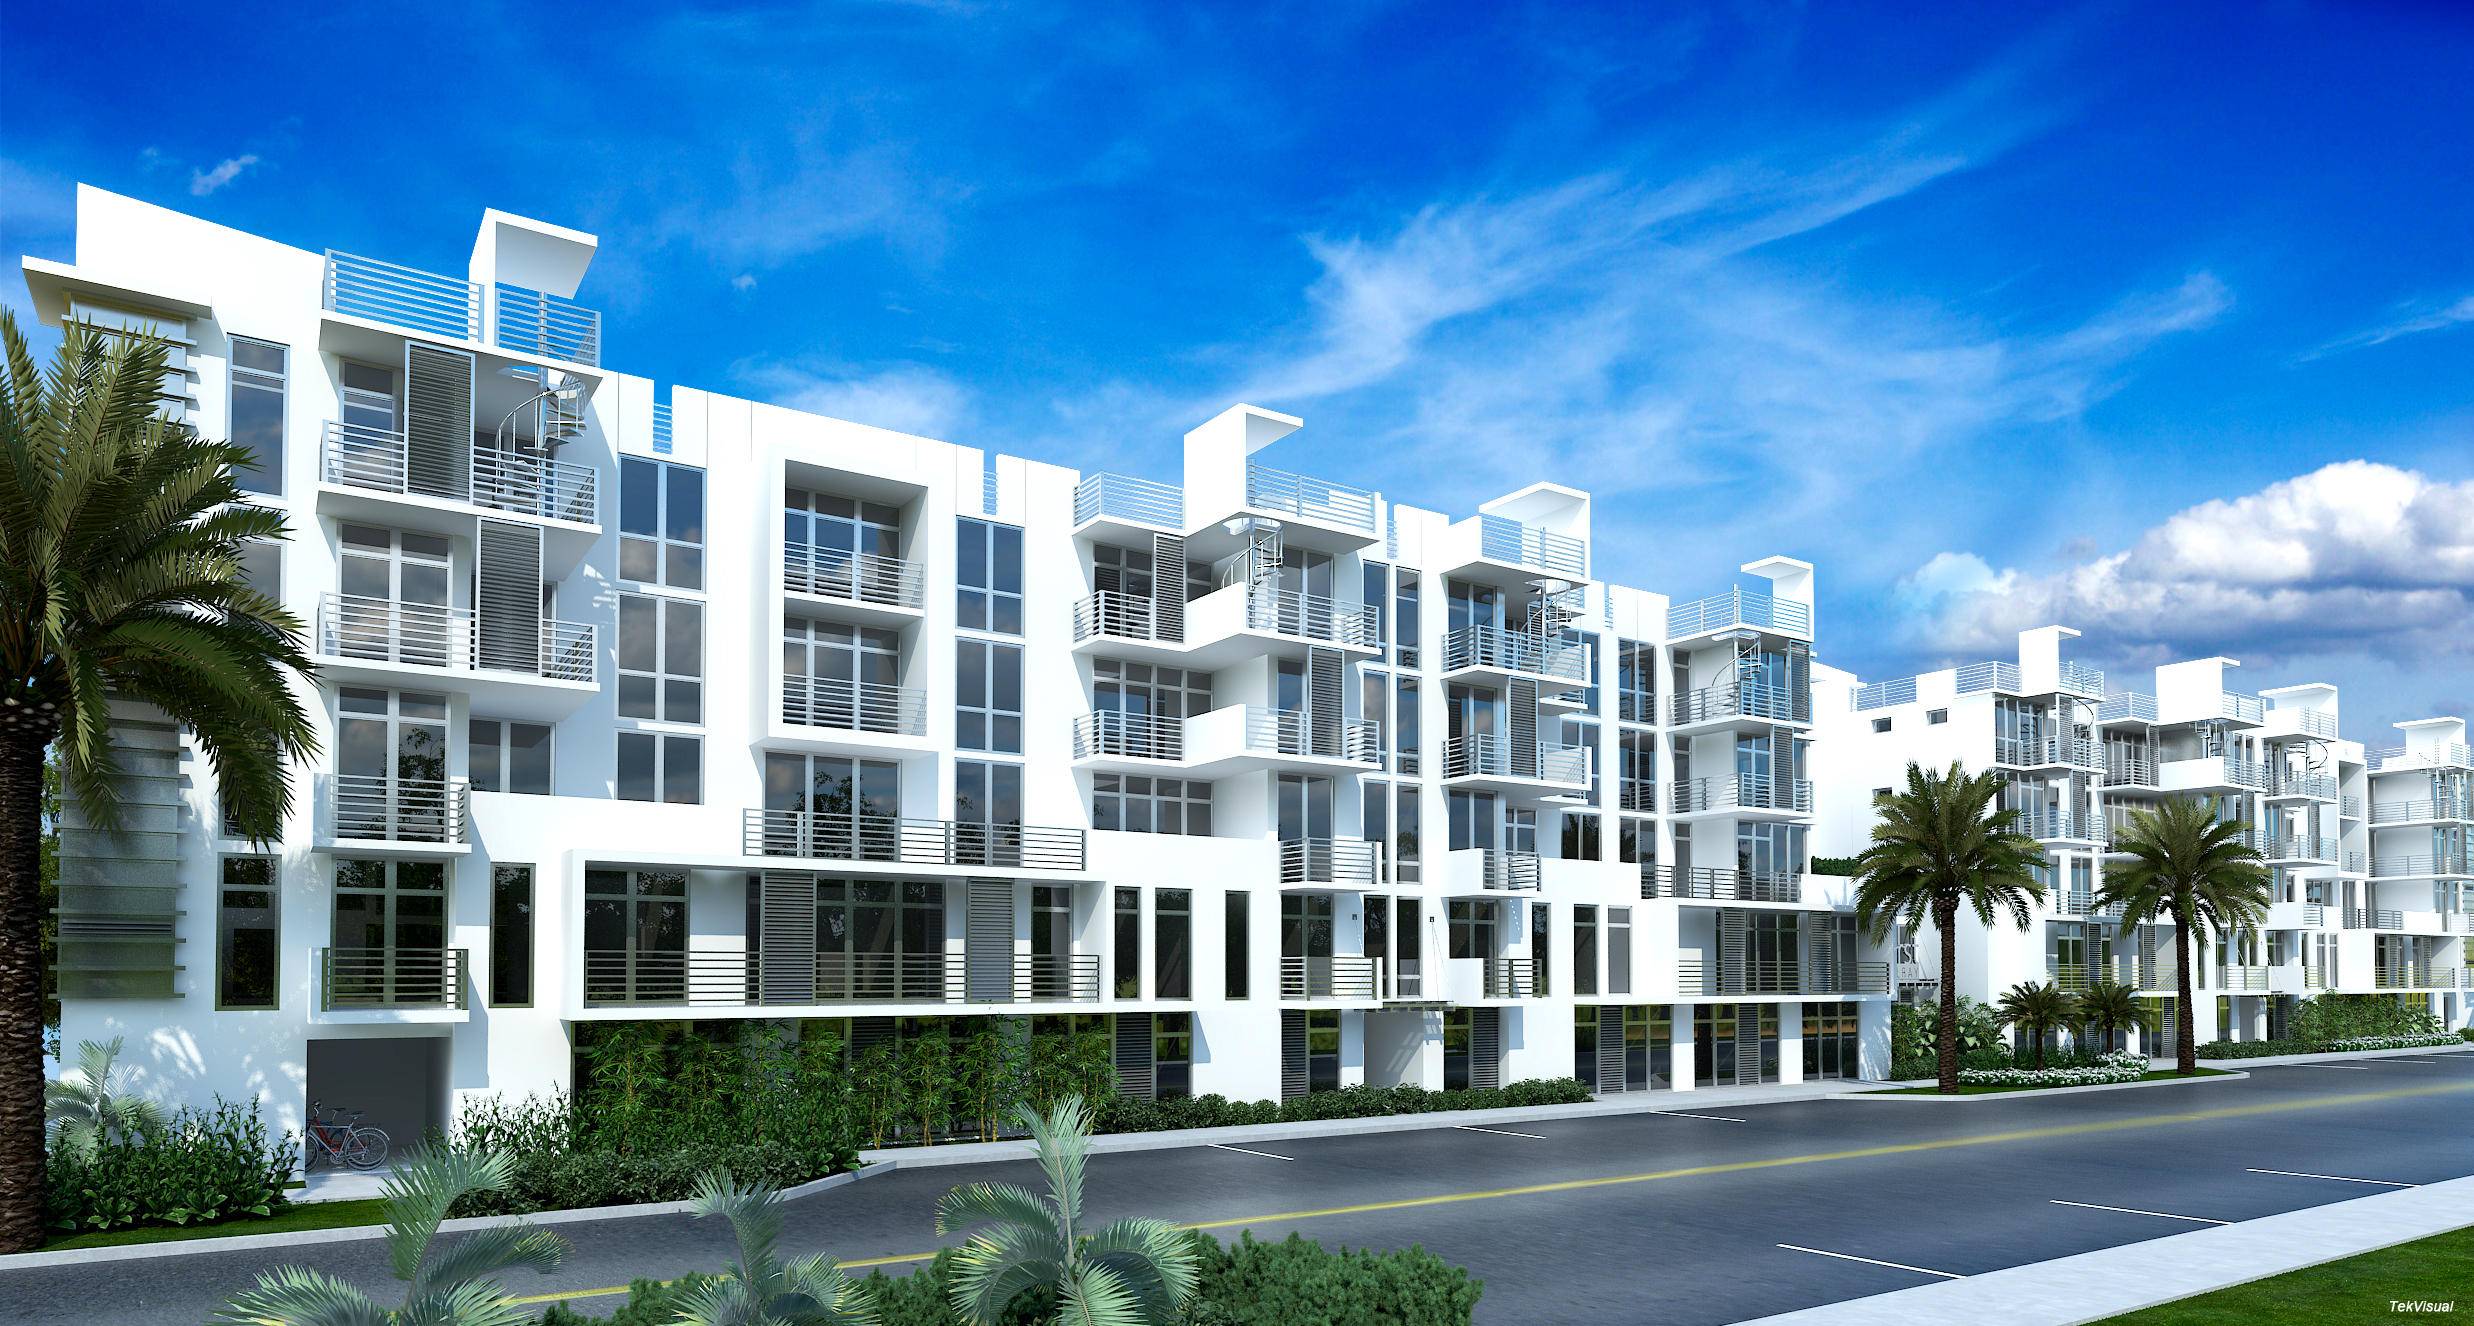 Rental available immediately at Downtown Delray's Premier Address 111 First Delray newly built 2019 condo in the center of it all !